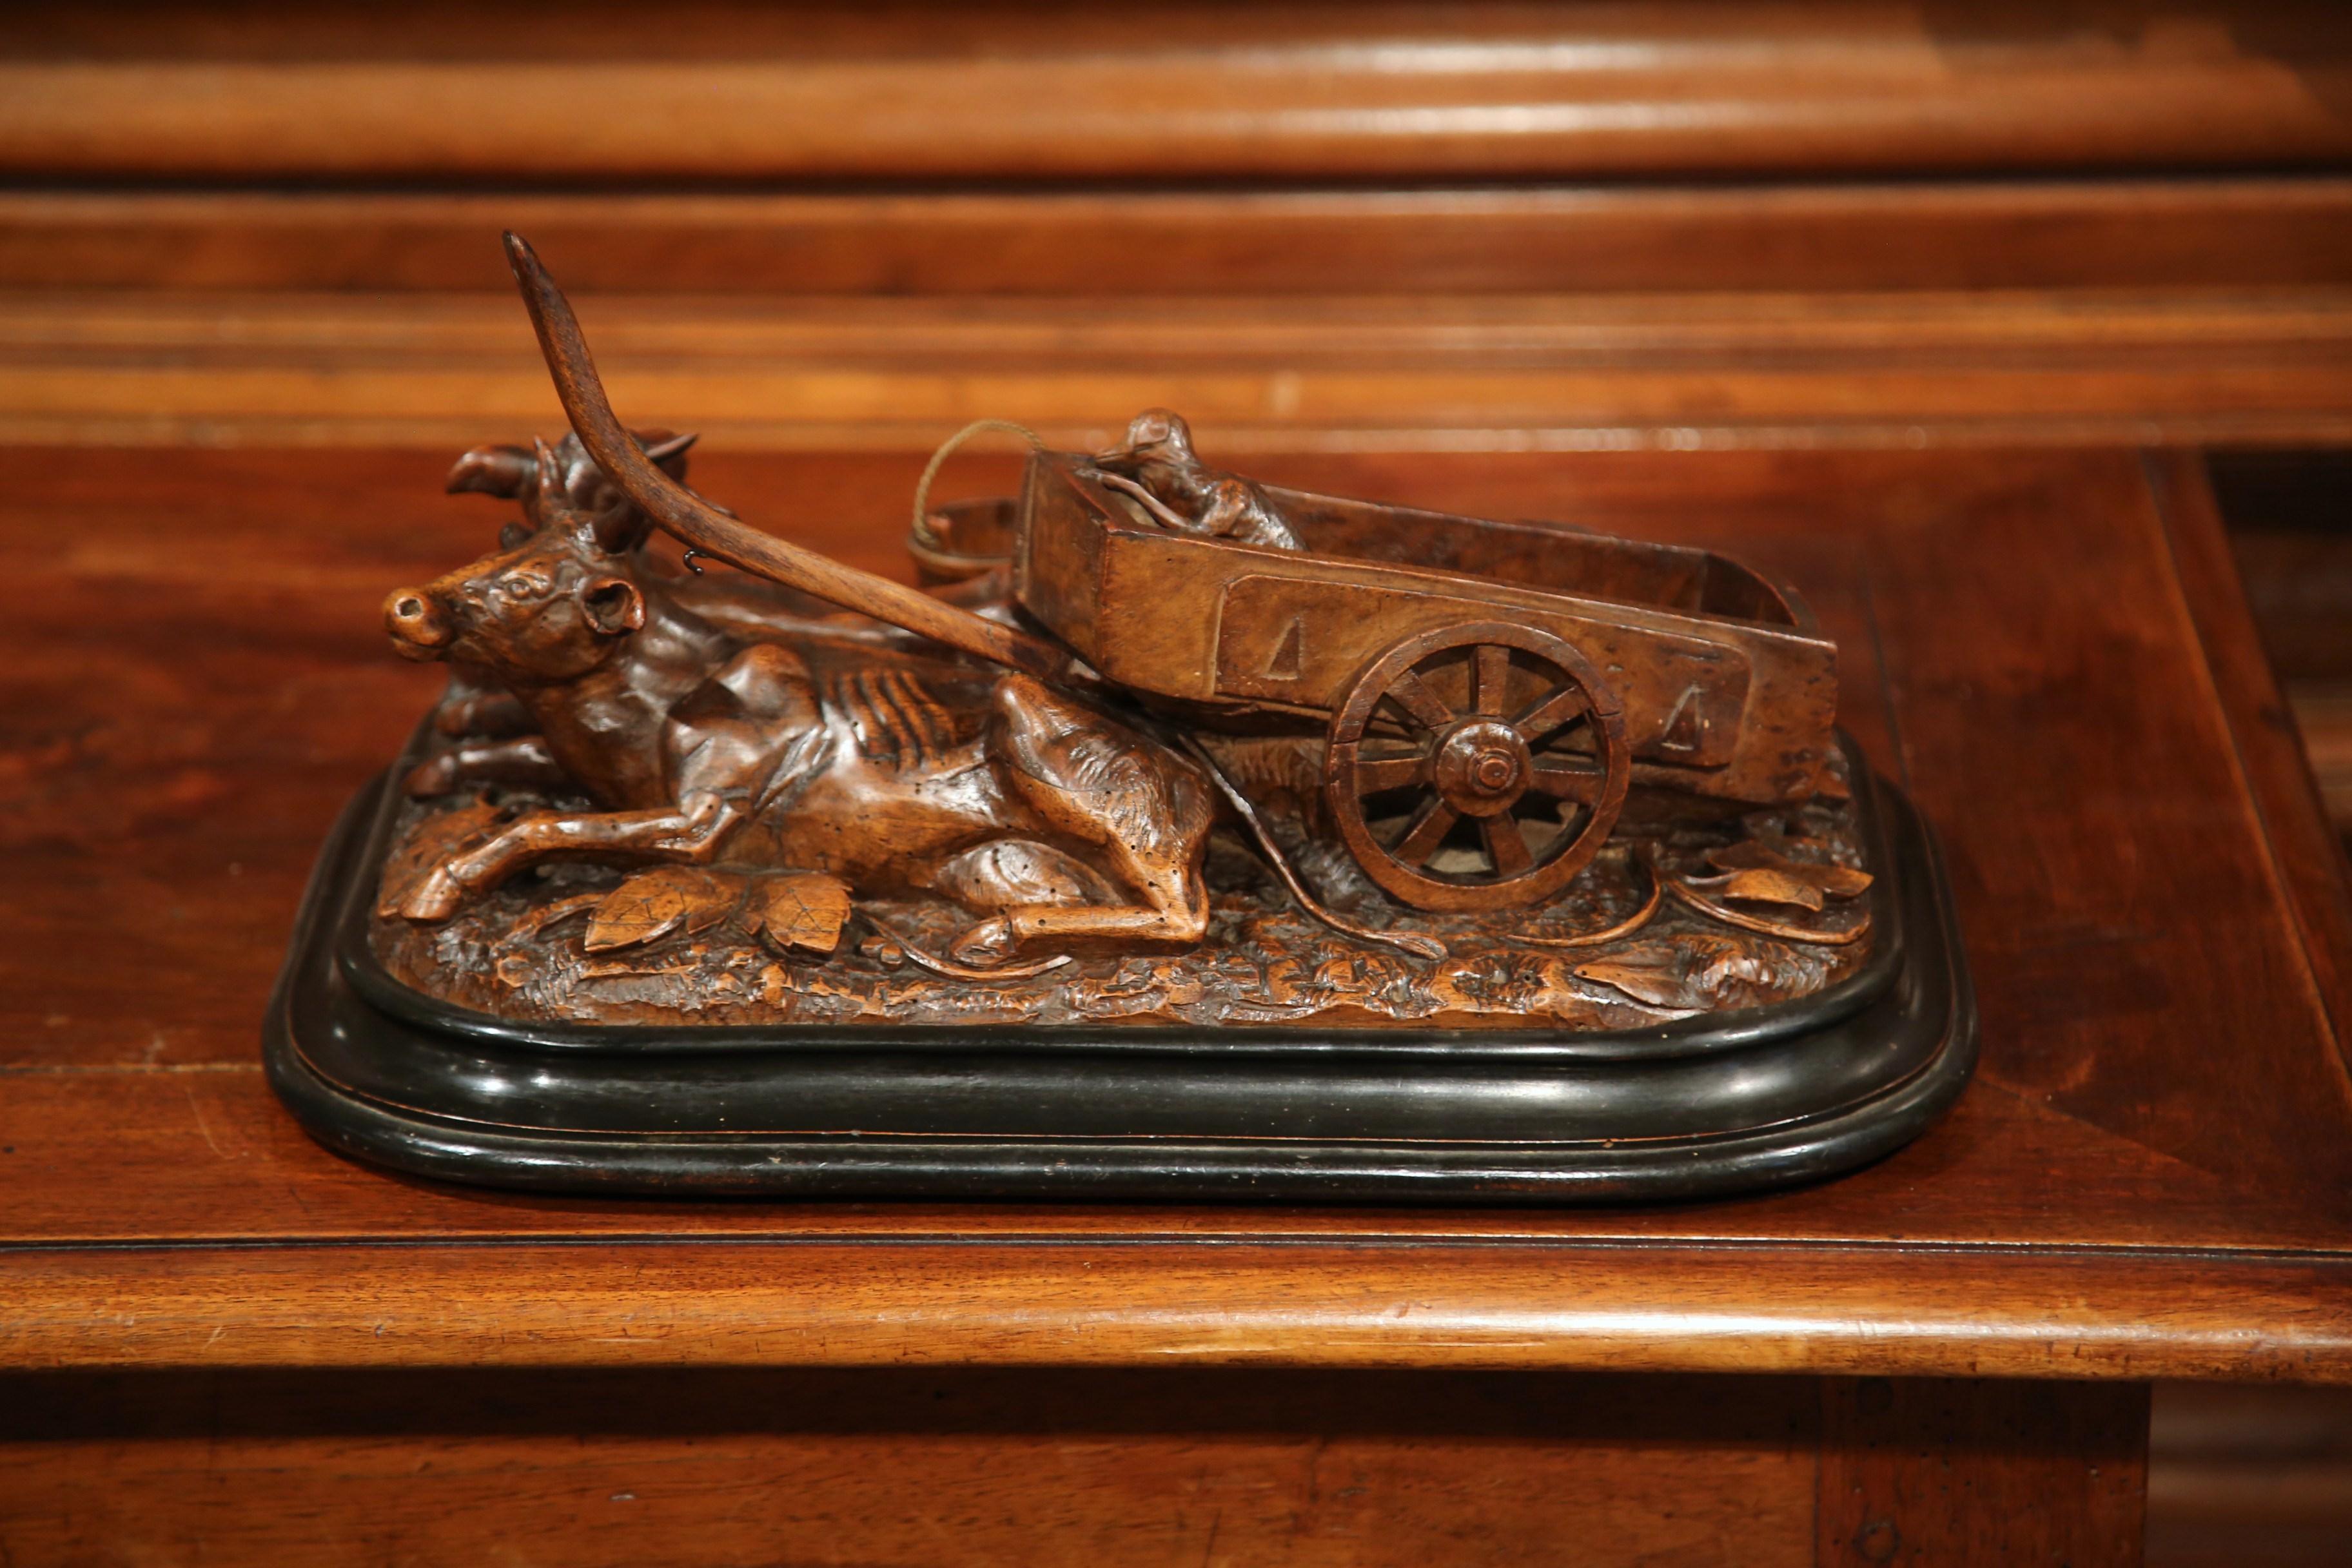 This stately antique Black Forest sculpture composition was carved in France, circa 1860. The sculptural fruitwood work of art features a farm scene with two cows lying down, a wheelbarrow cart with a dog inside; it also features a lizard and a pair